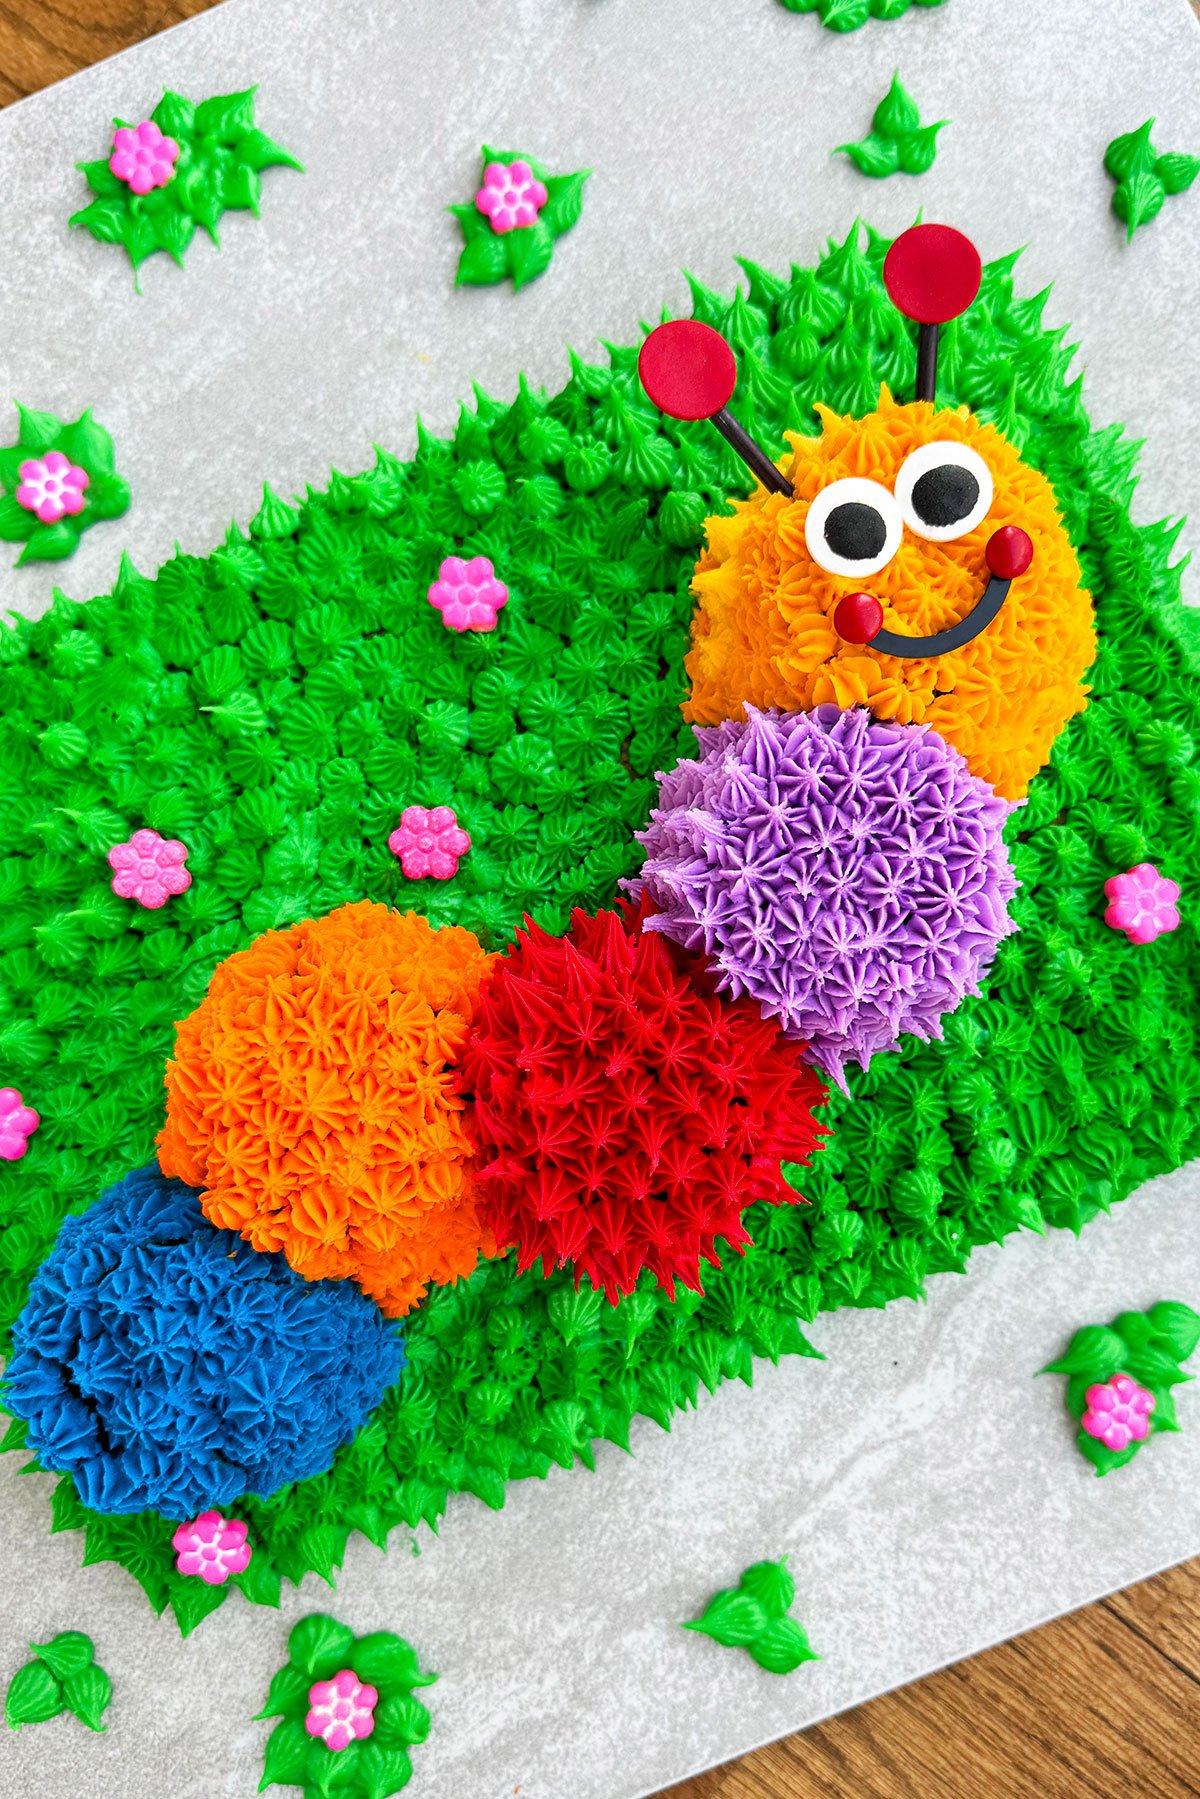 Easy Caterpillar Cake With Buttercream Icing on Light Gray Cake Board. 